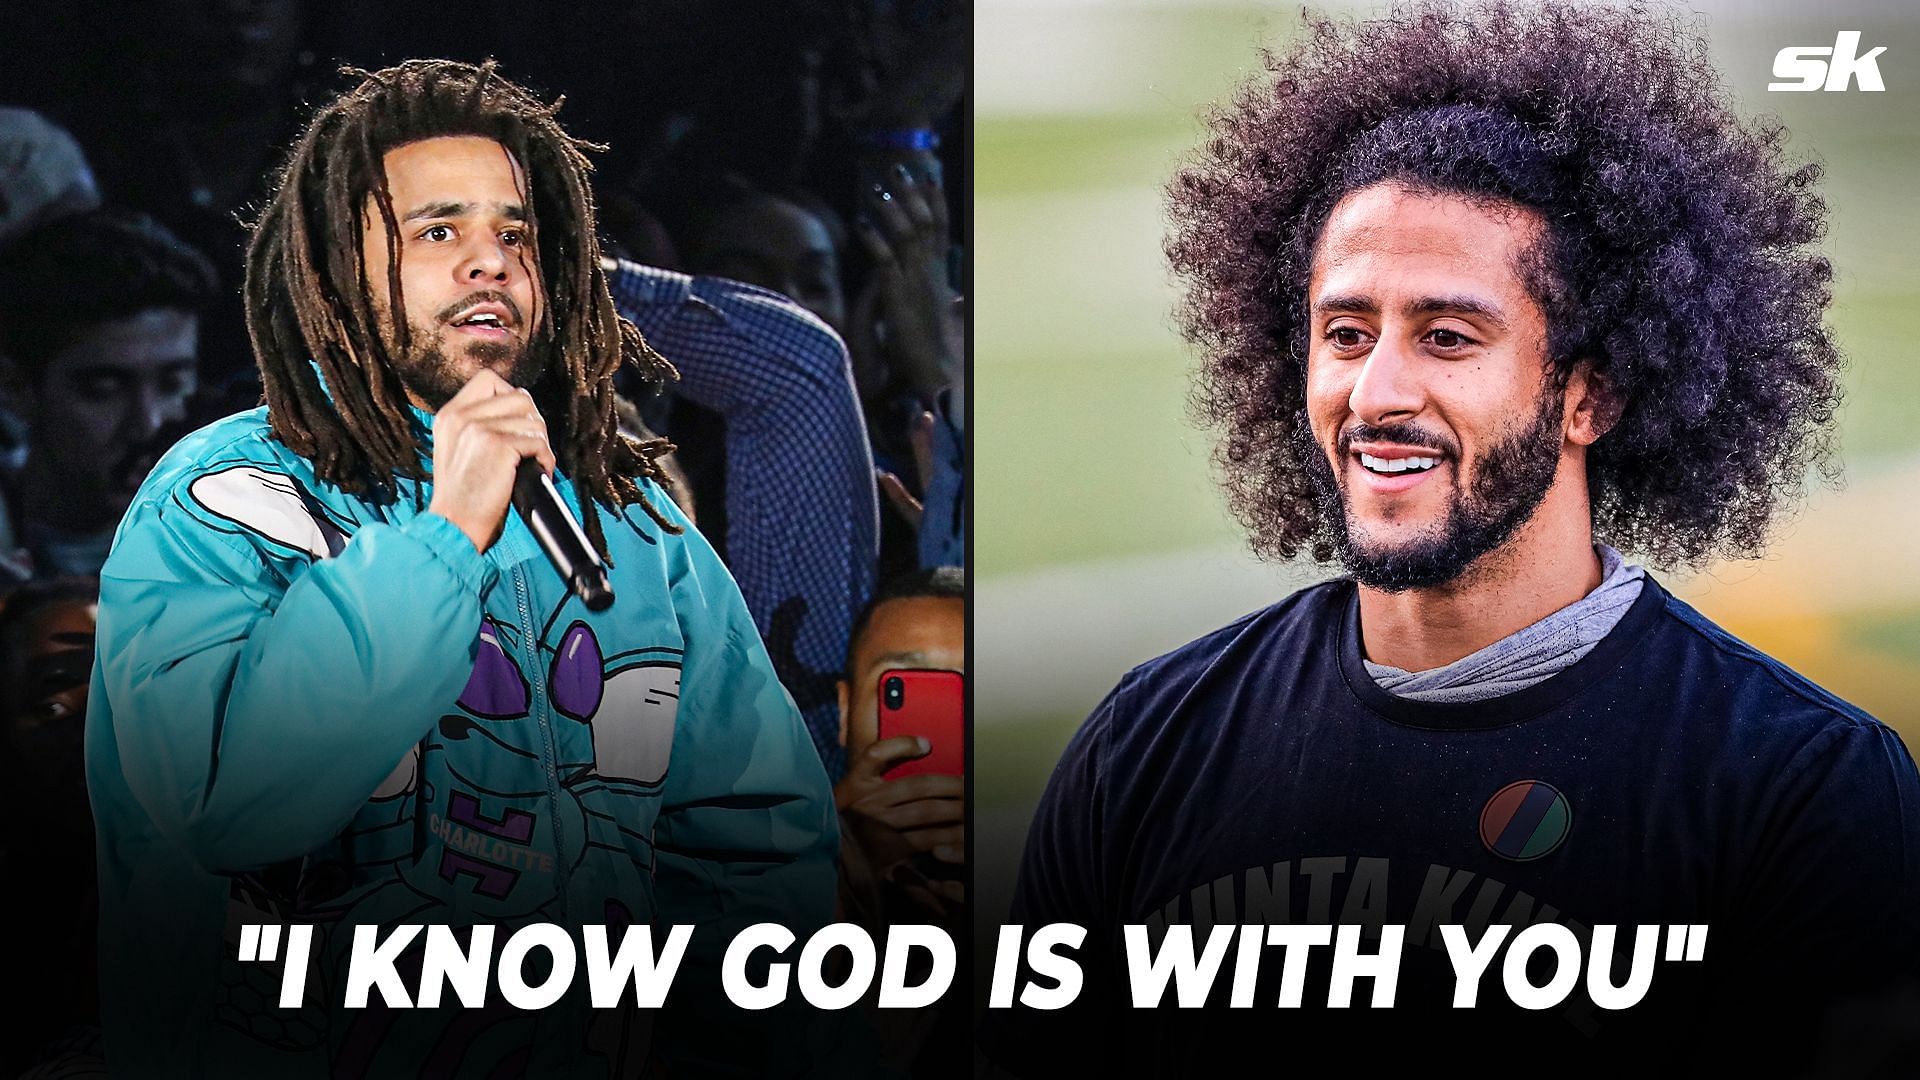 Rapper J Cole has shown his support for Colin Kaepernick in the latter